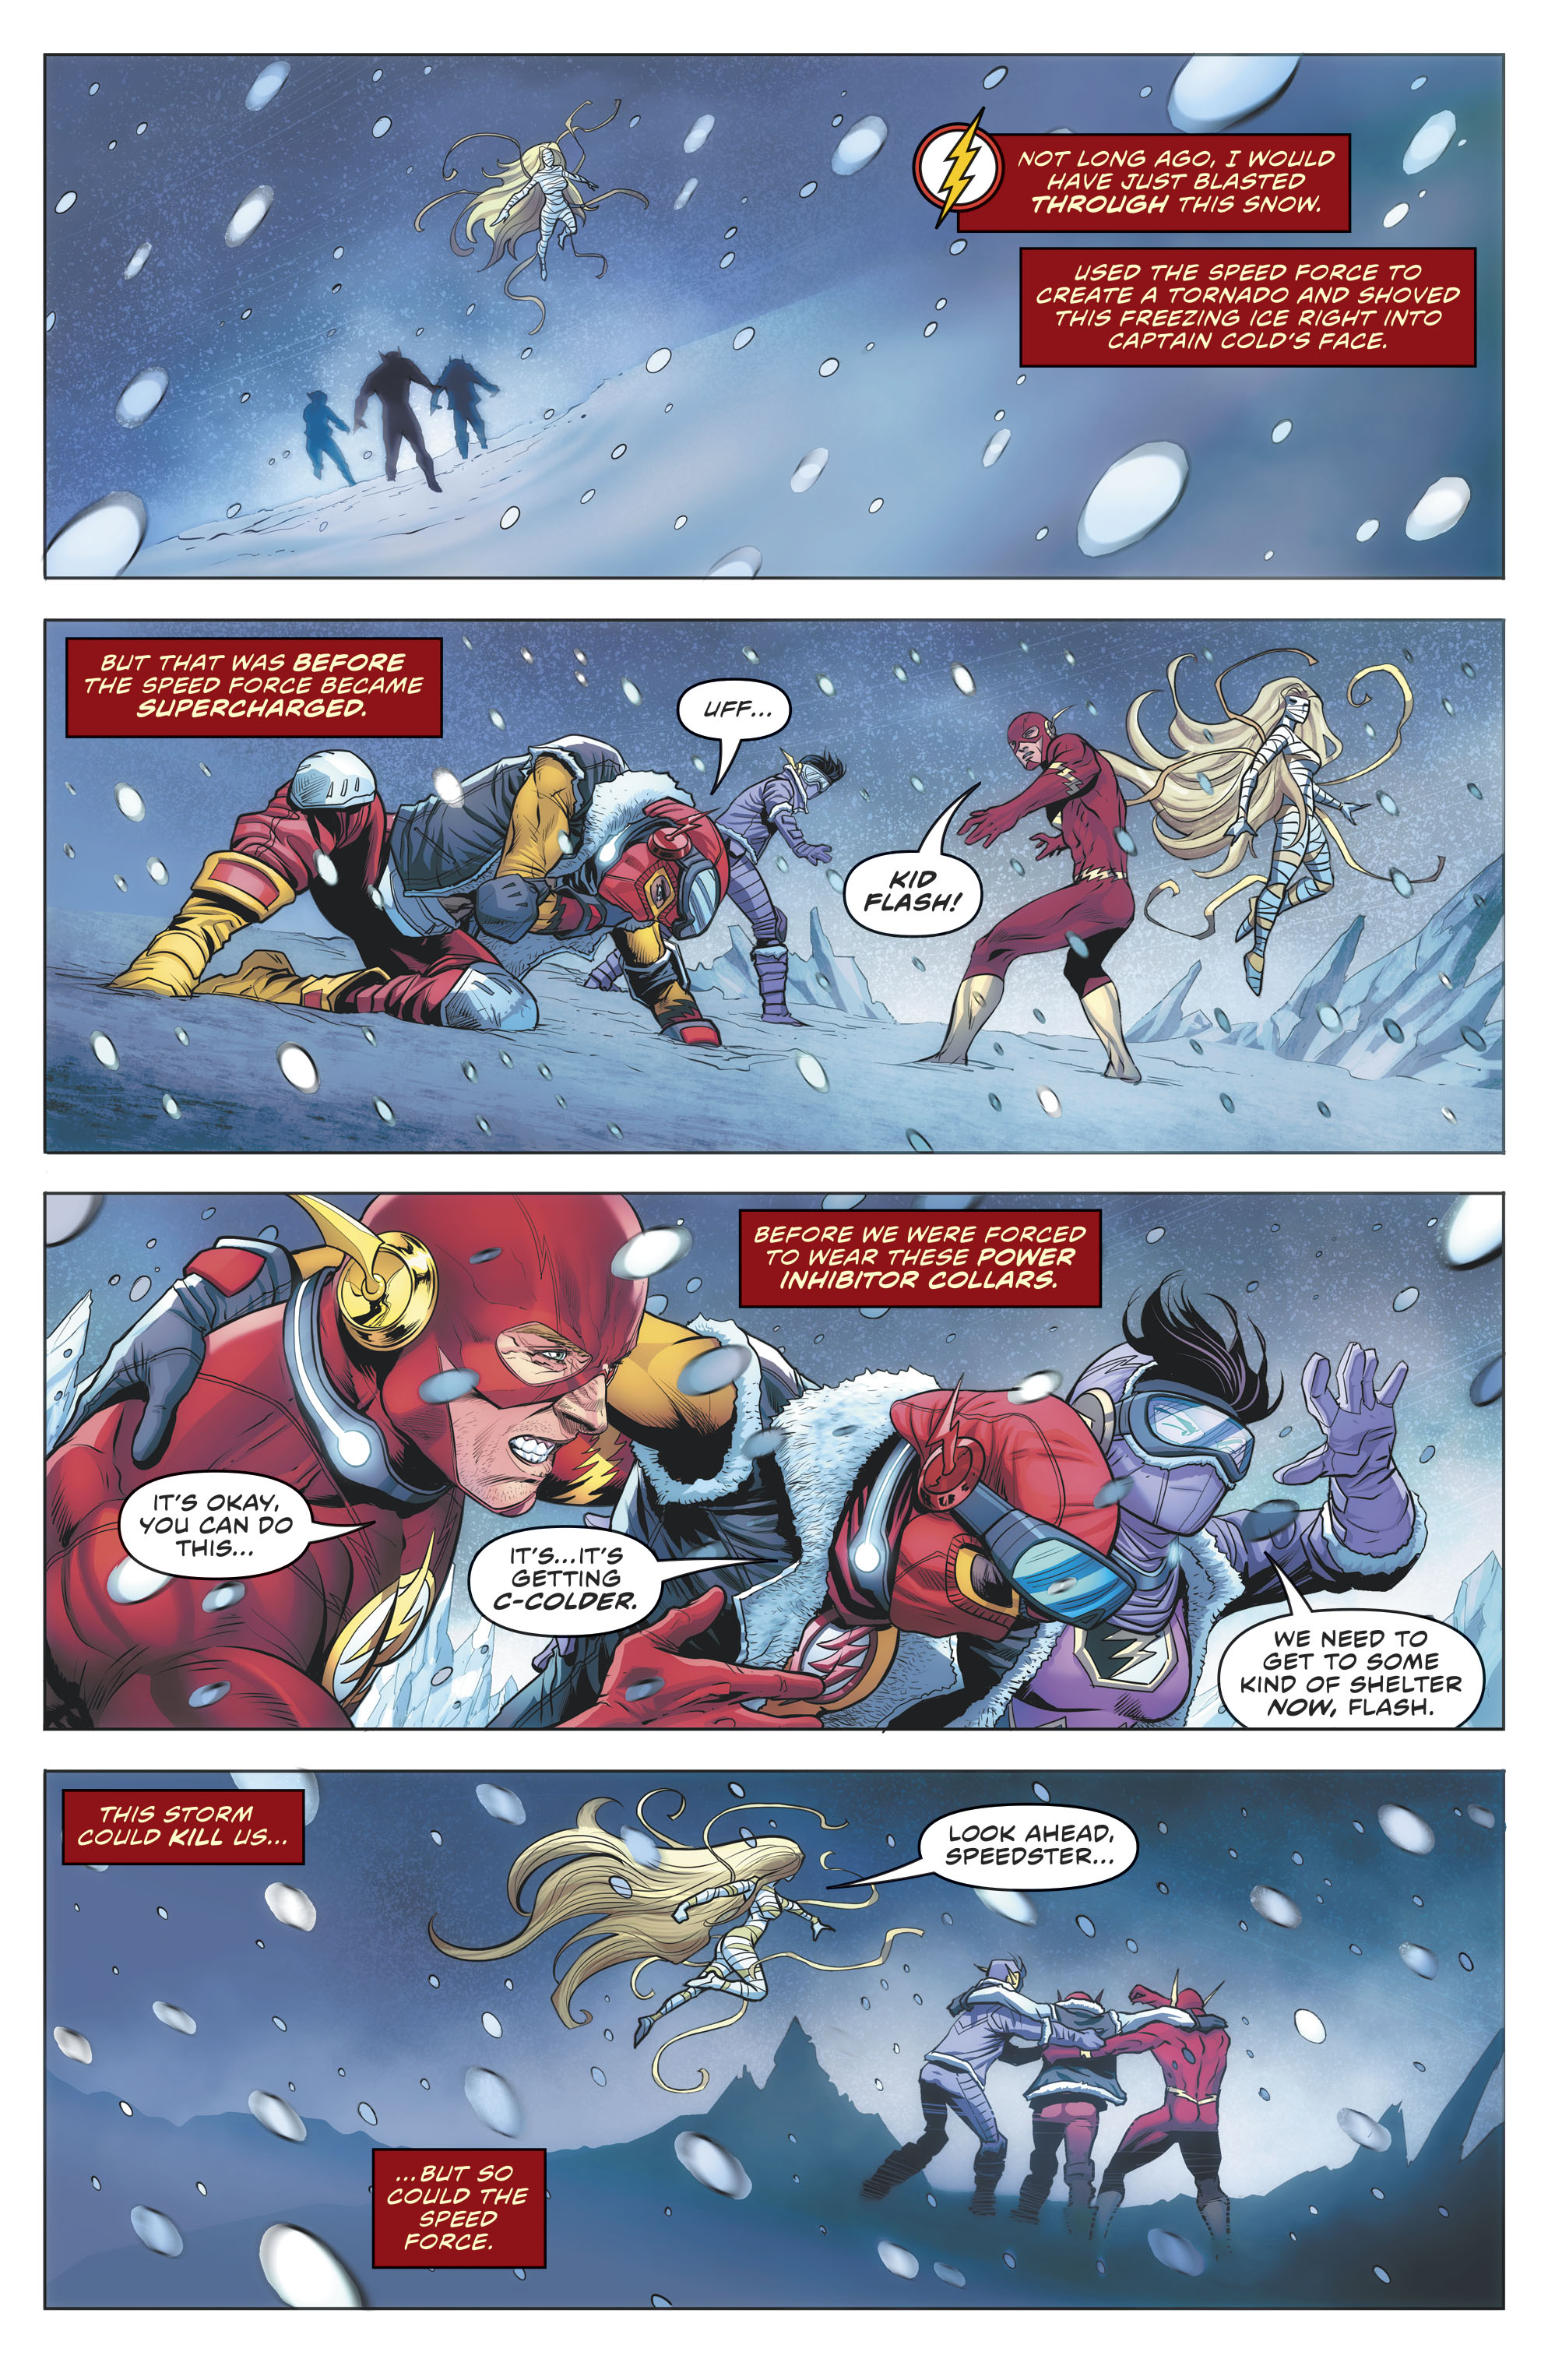 The Flash (2016-): Chapter 84 - Page 3